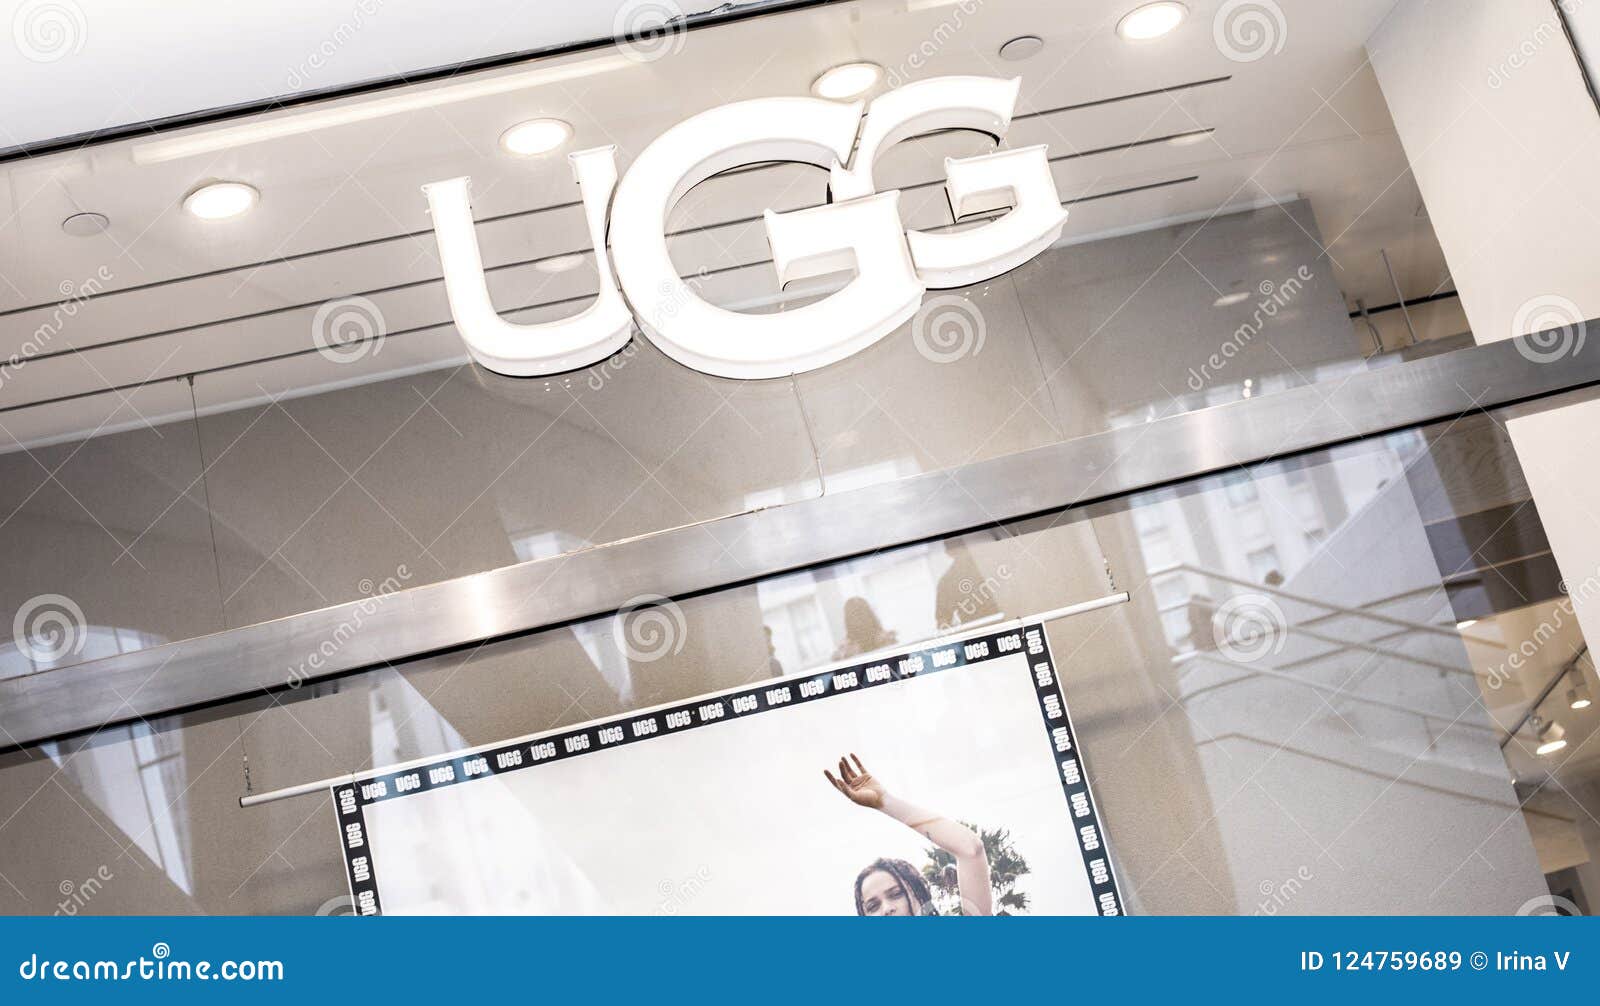 ugg boots store in new york city